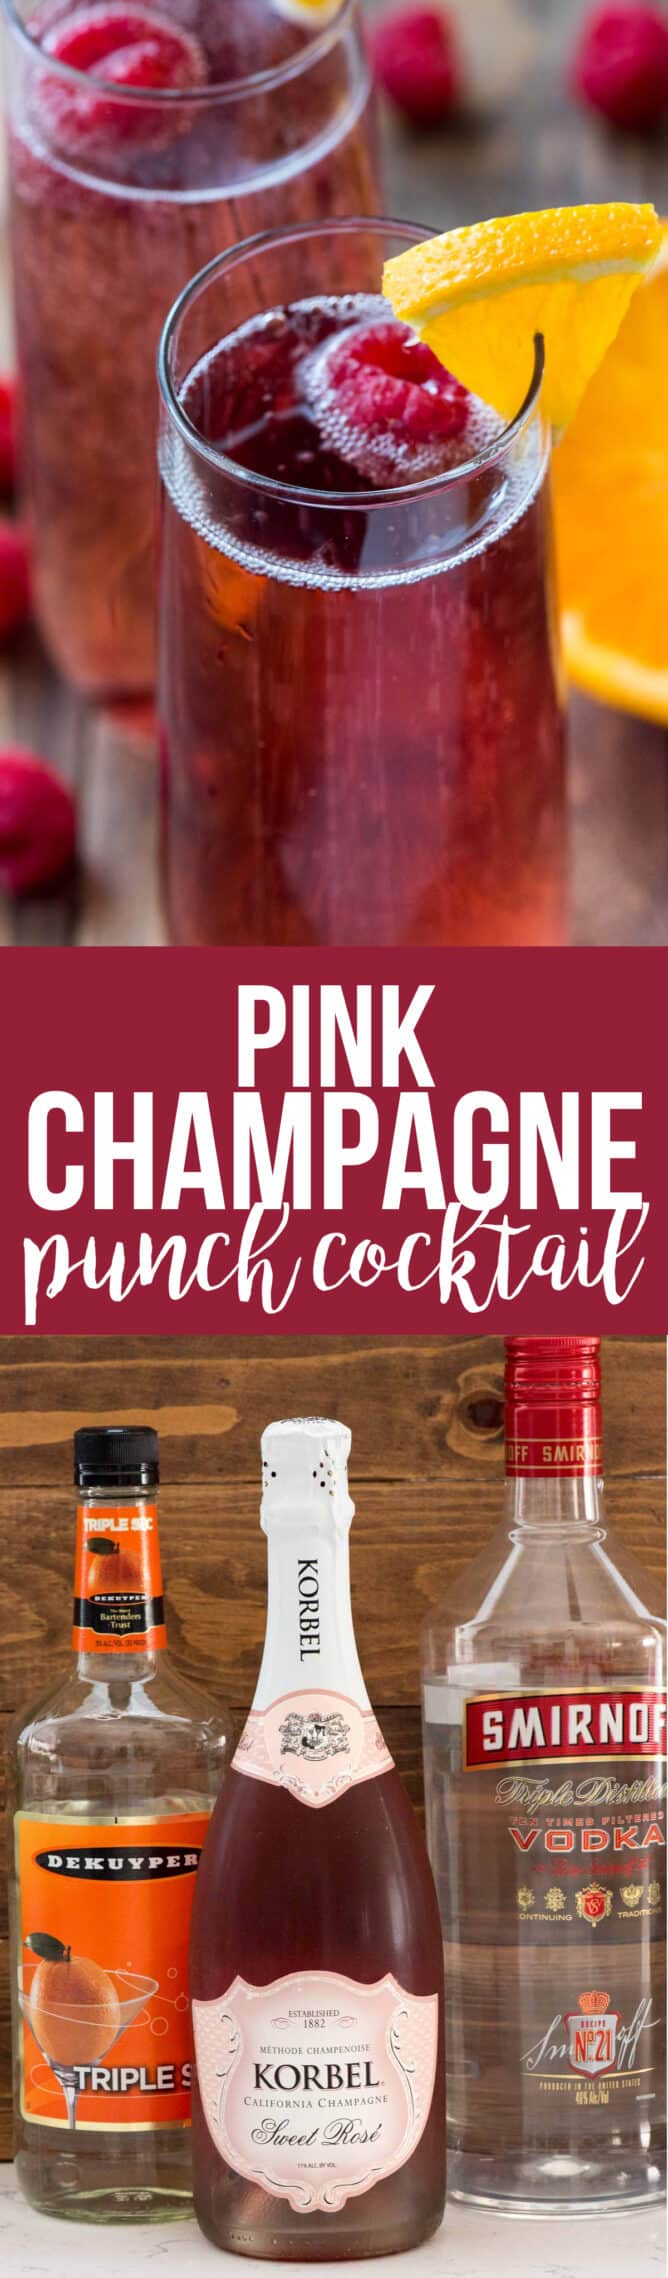 Collage of Pink Champagne Punch Cocktail